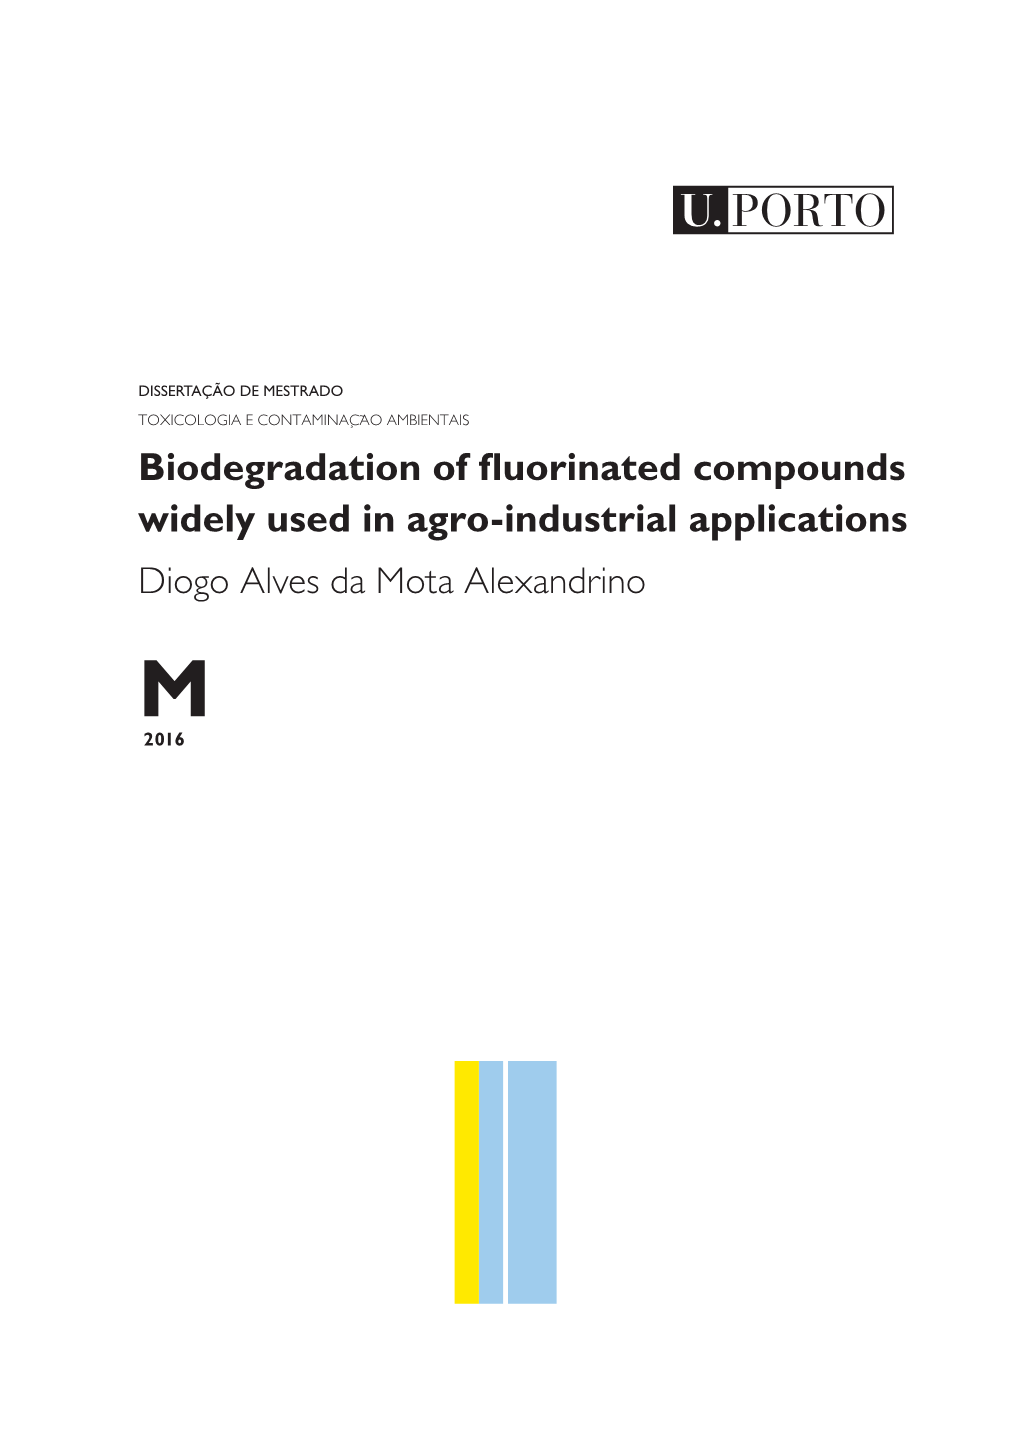 Biodegradation of Fluorinated Compounds Widely Used in Agro-Industrial Applications Diogo Alves Da Mota Alexandrino M 2016